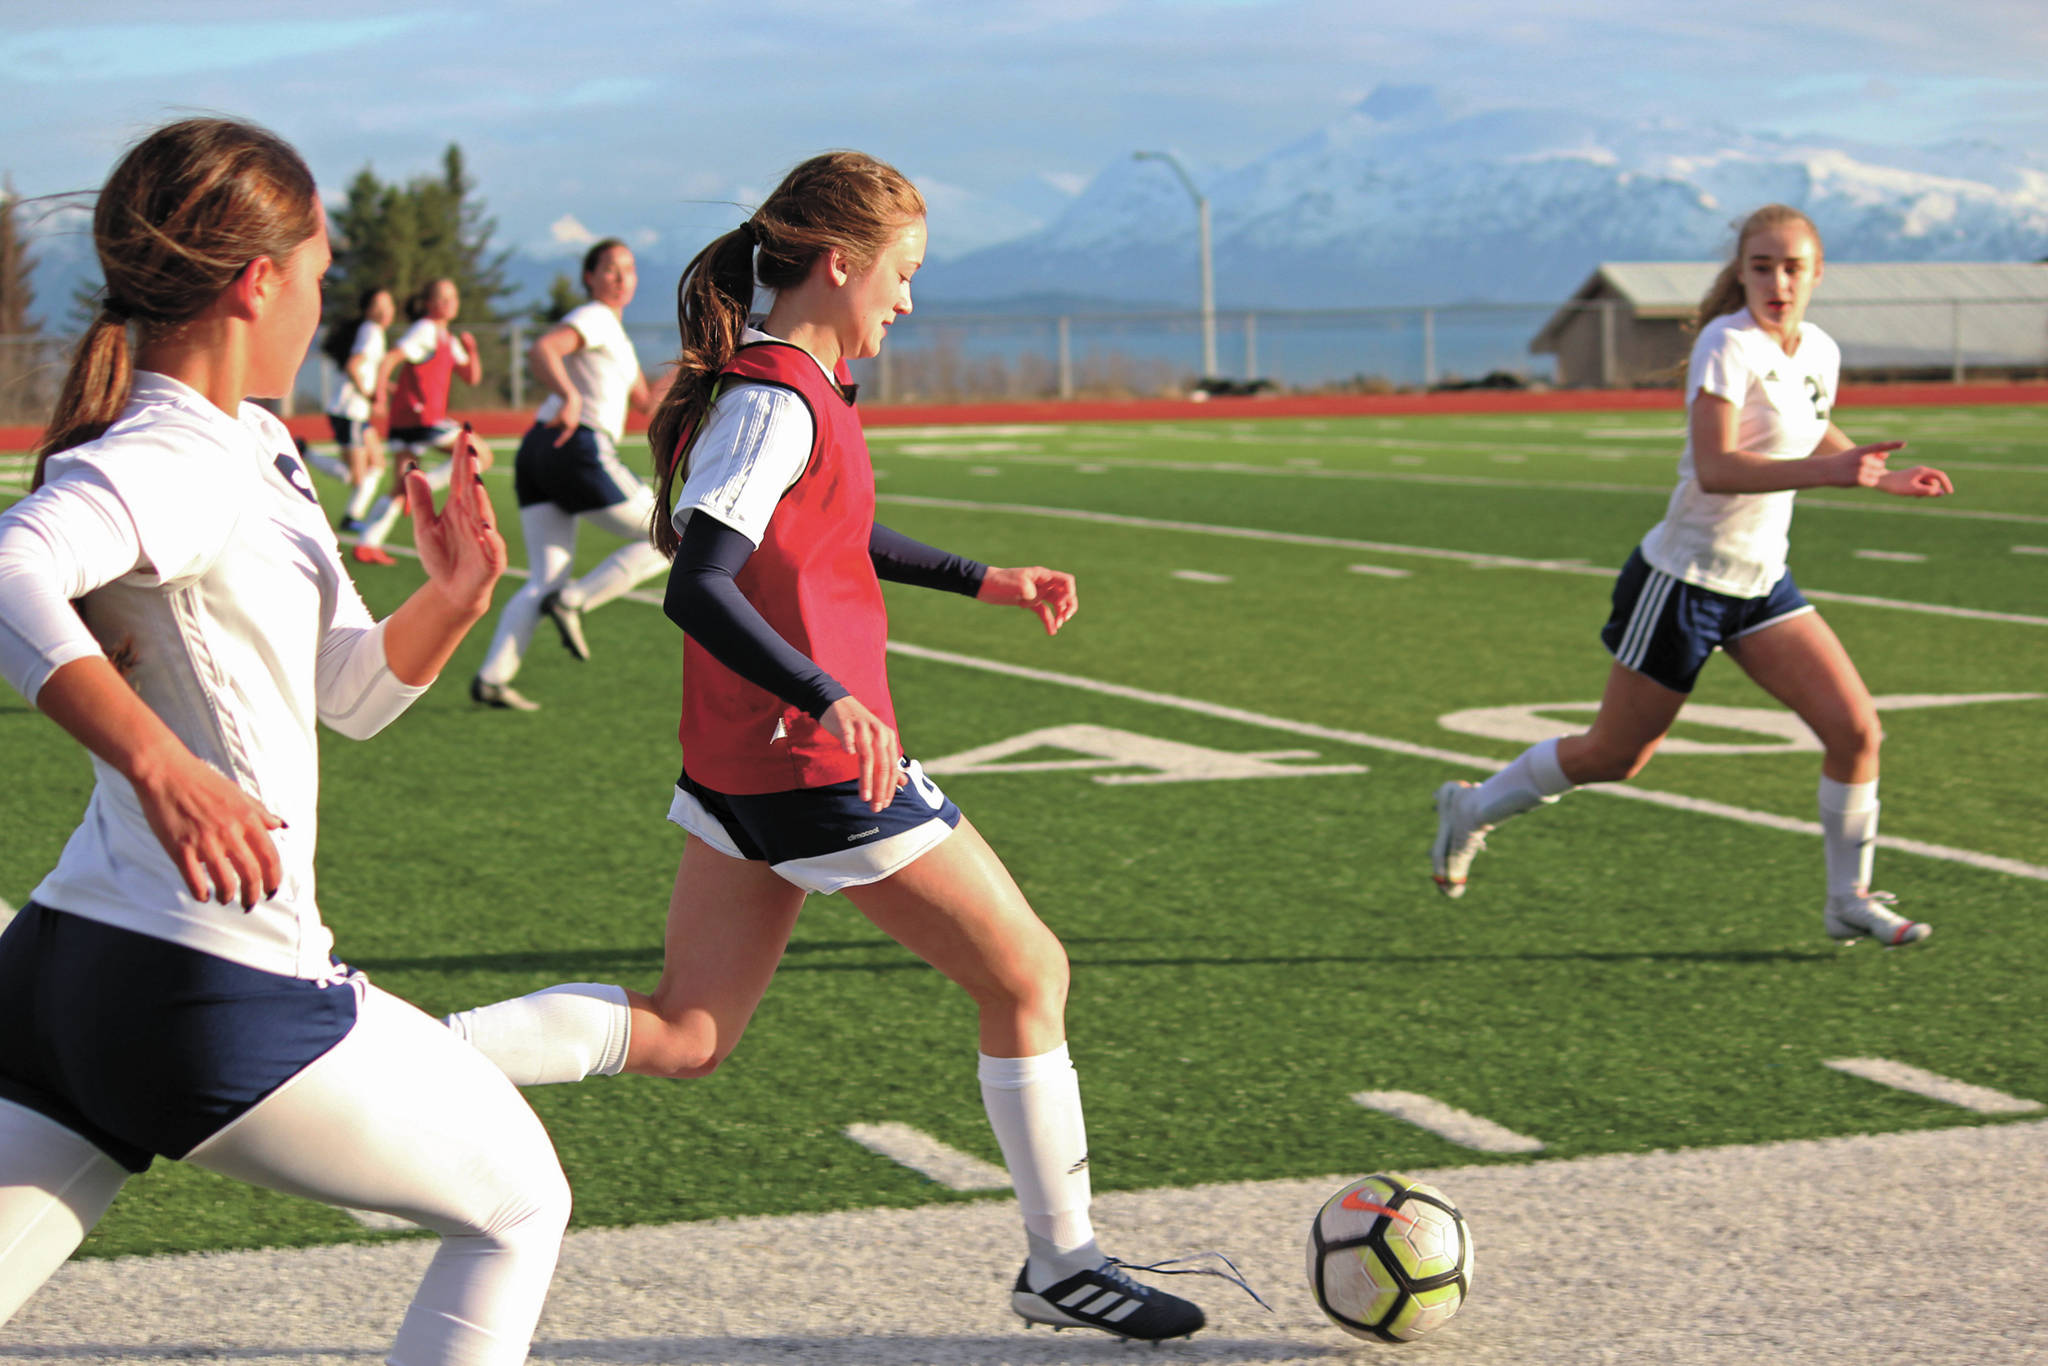 Homer’s Eve Brau takes the ball up the field during a game against Soldotna High School on April 9, 2019 in Homer, Alaska. (Photo by Megan Pacer/Homer News)